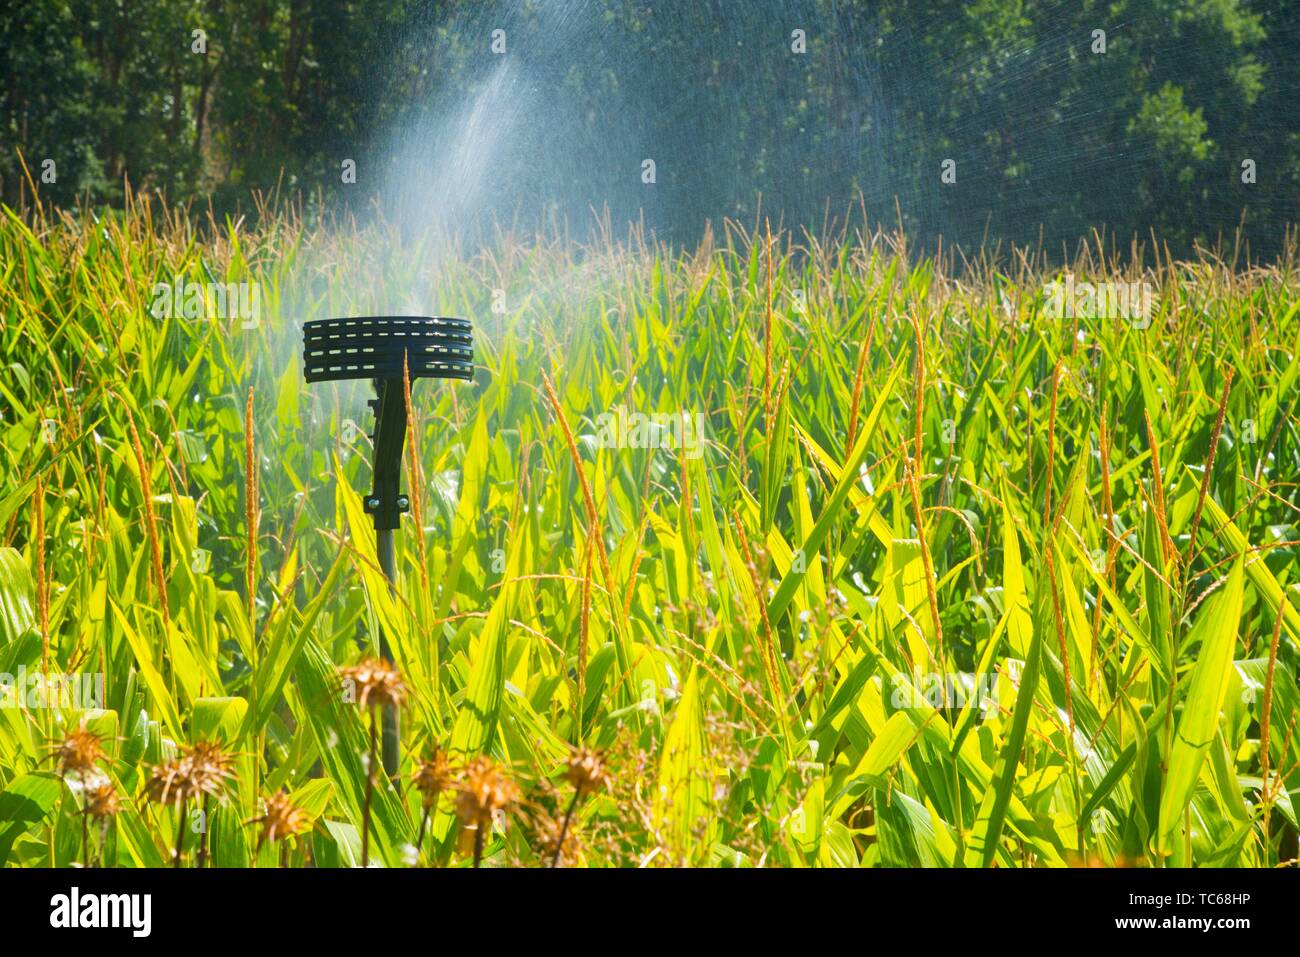 Irrigation system in corn field. Stock Photo